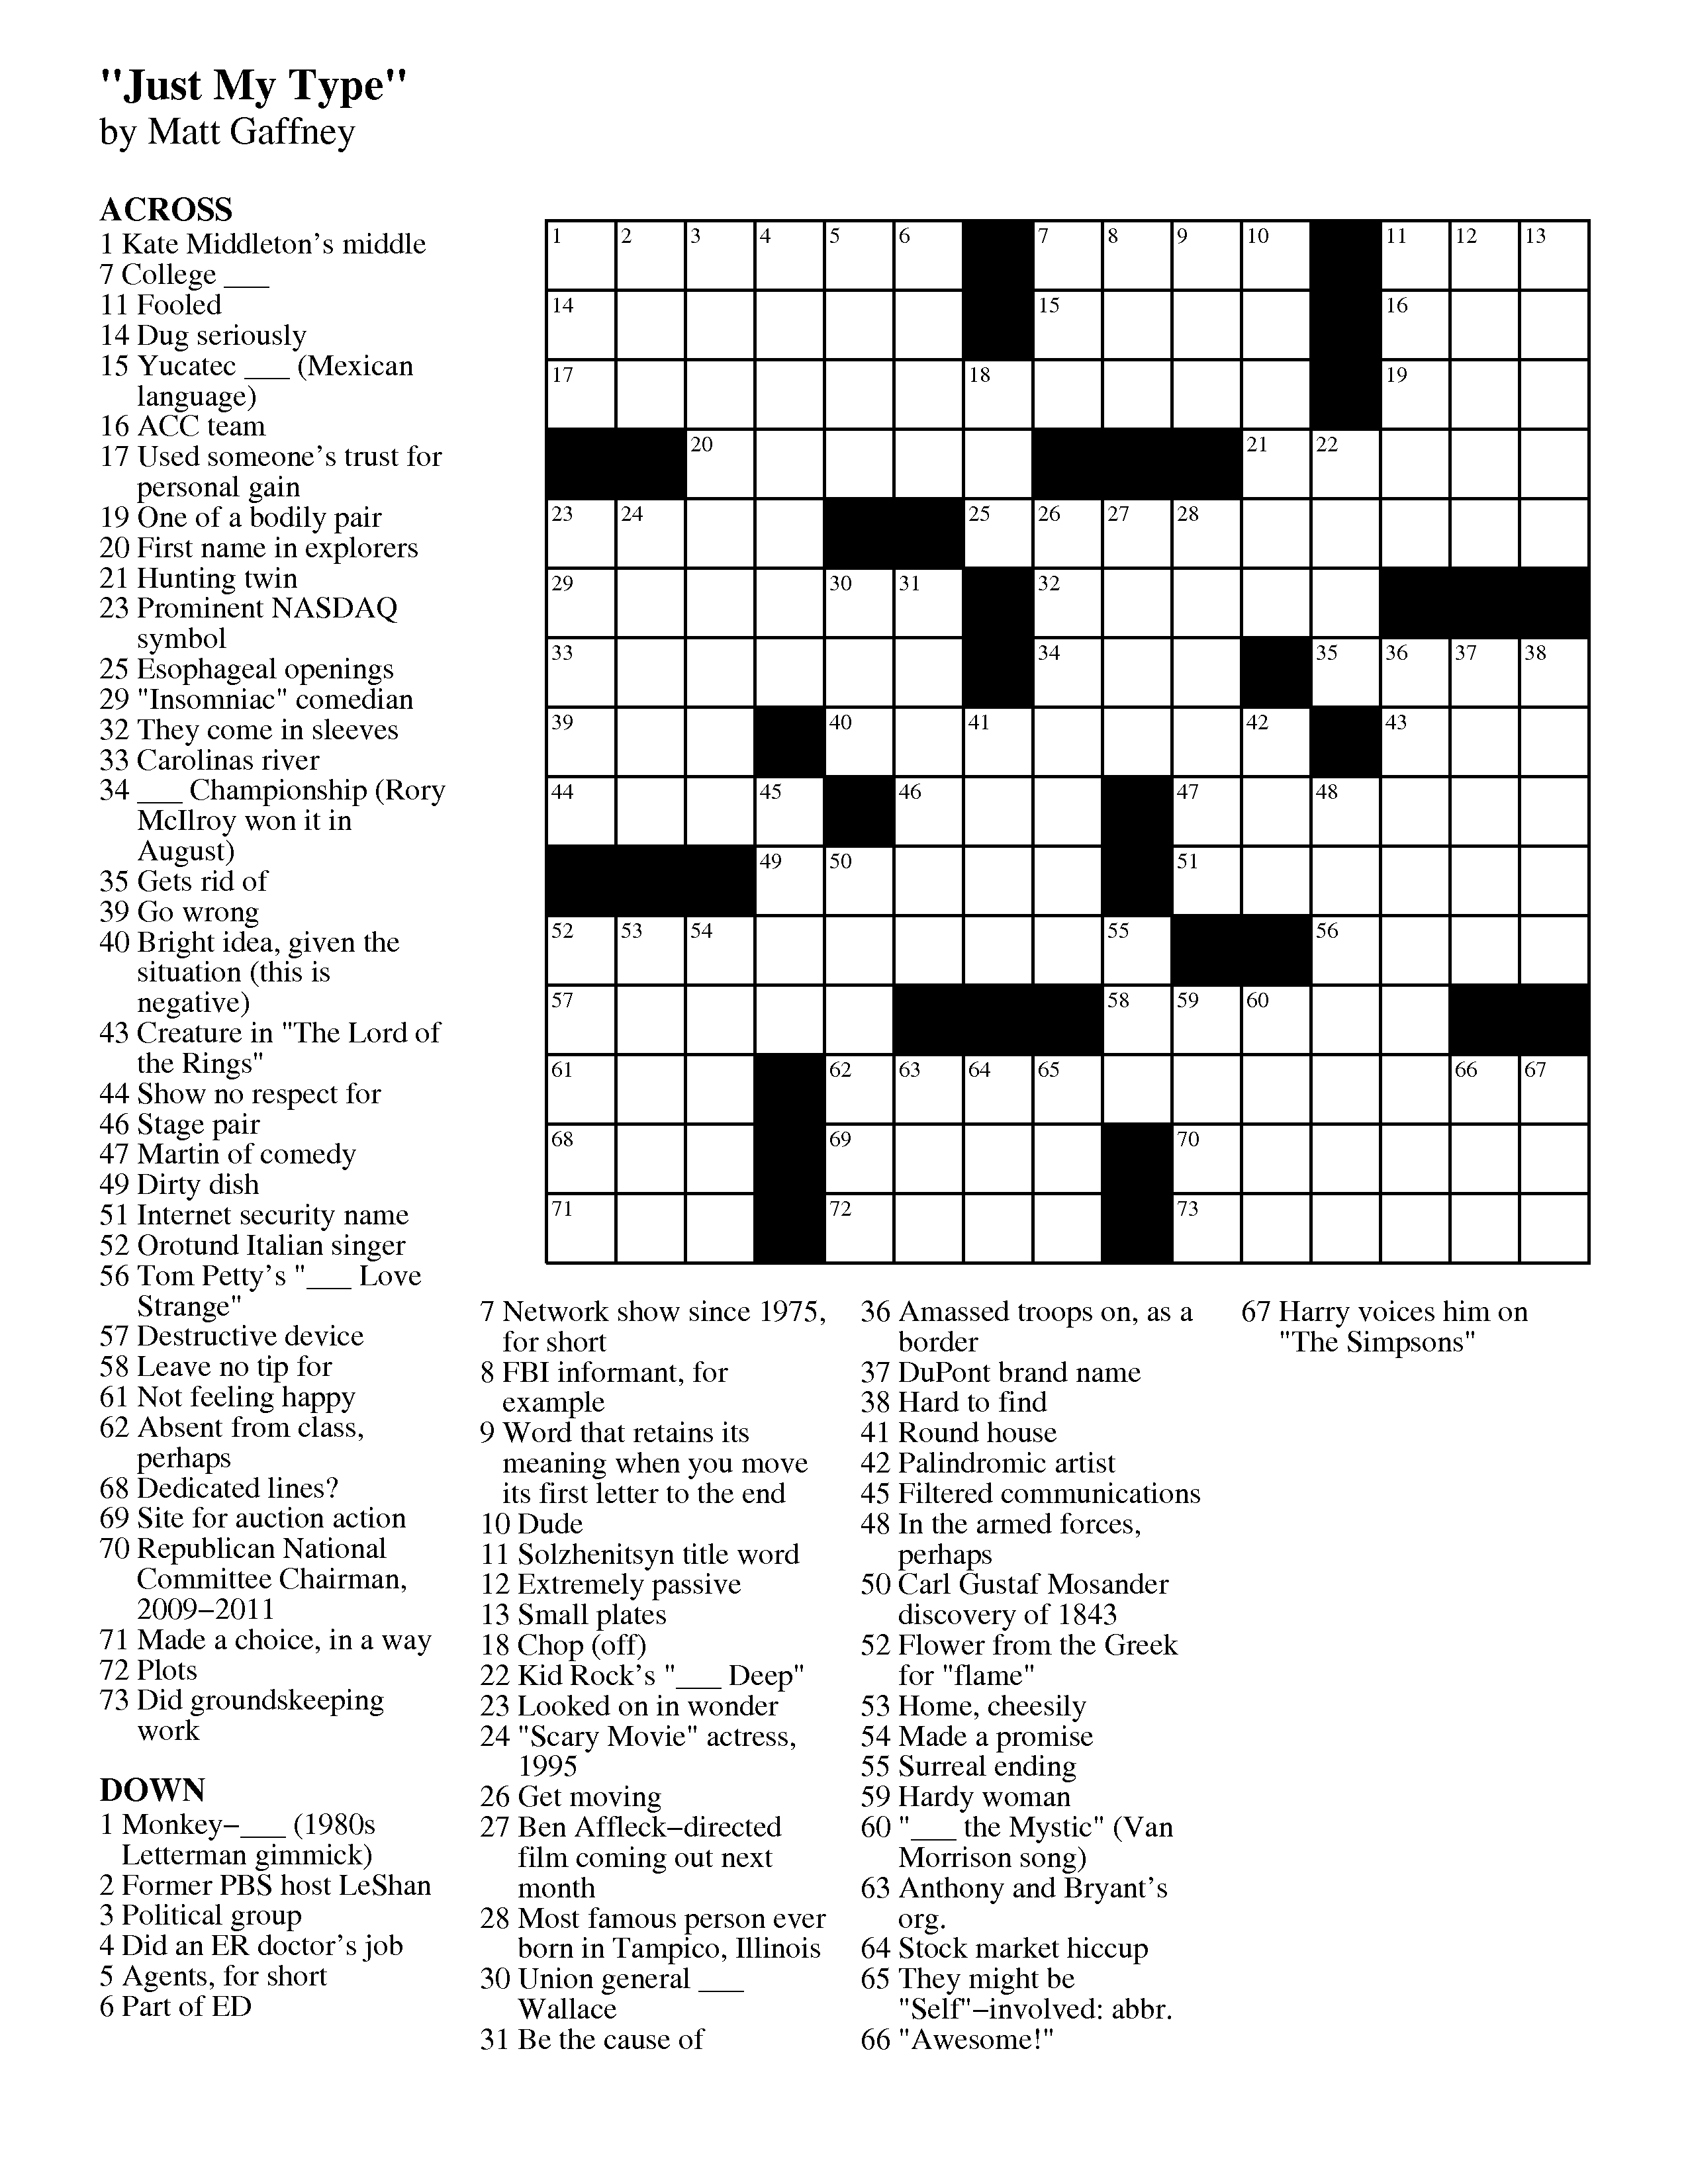 answers to todays daily celebrity crosswords